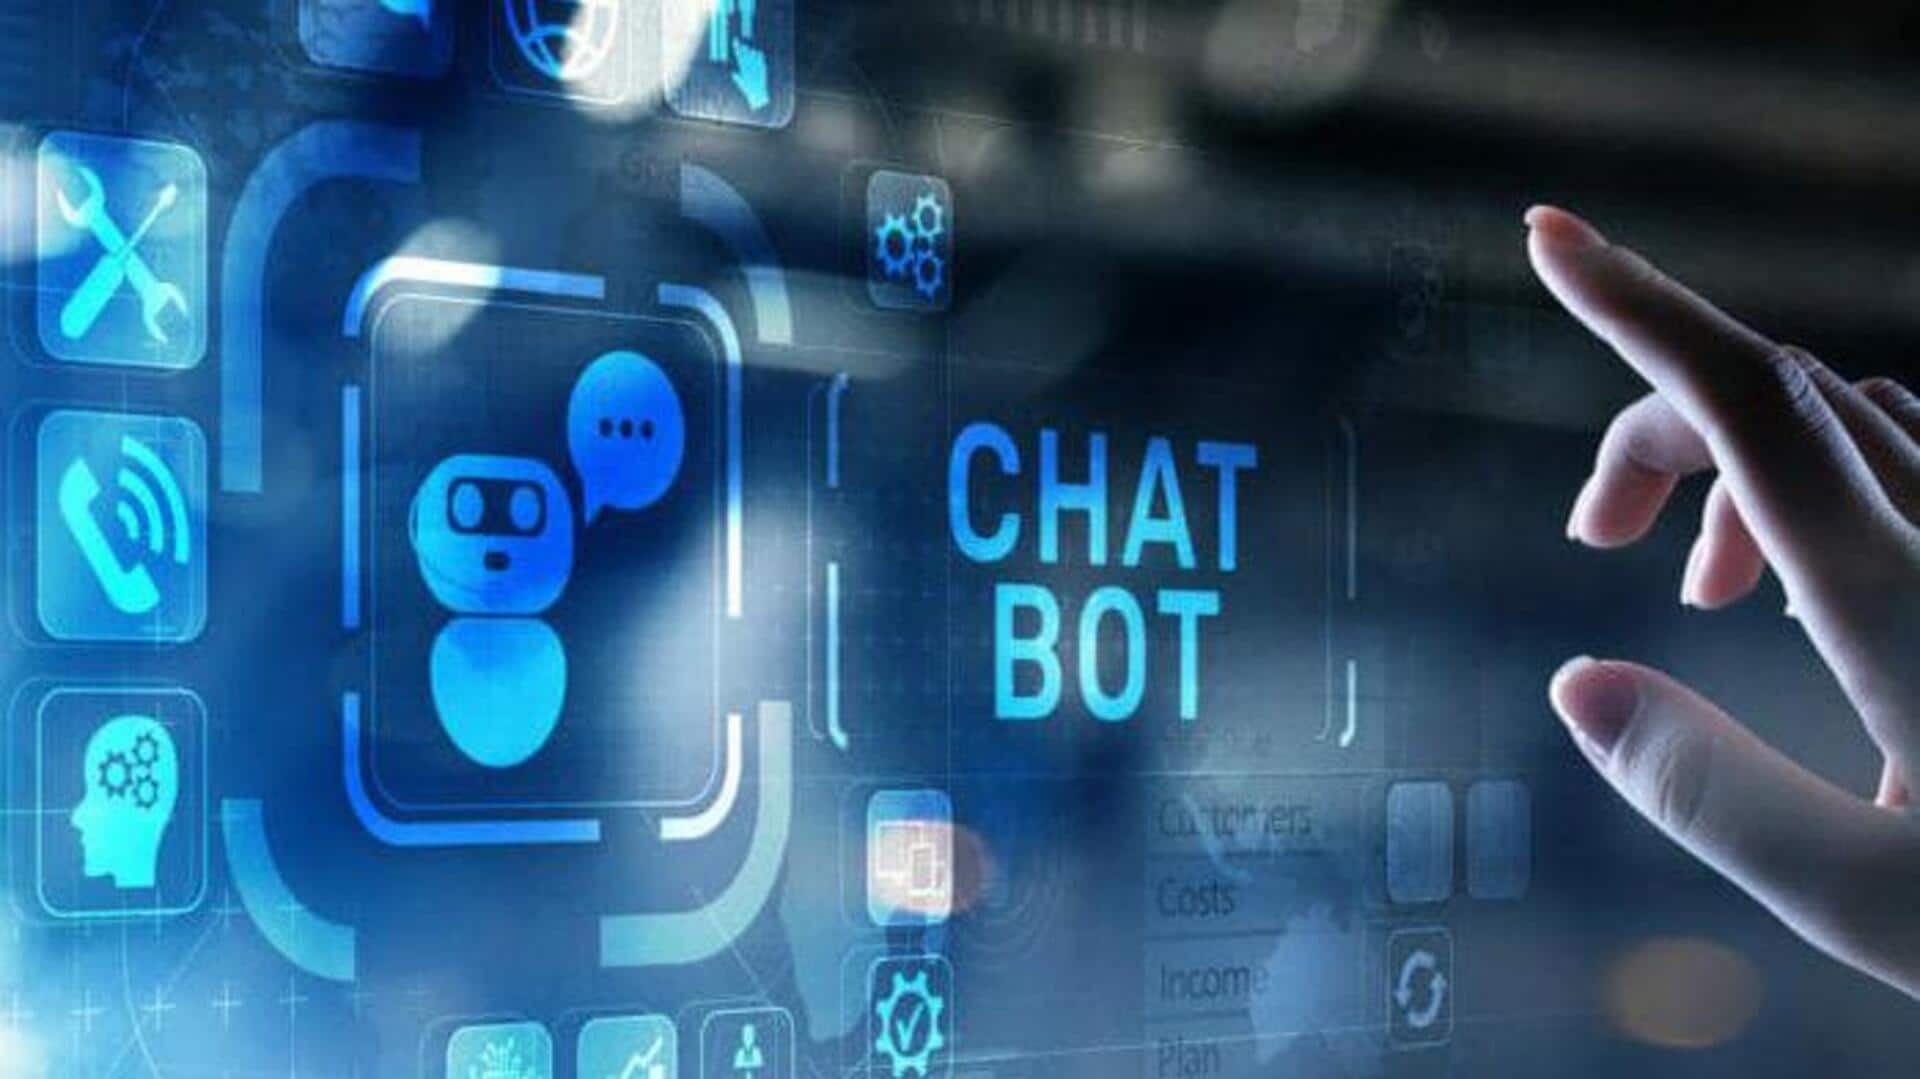 Microsoft's new tools will bolster AI chatbot security against manipulation